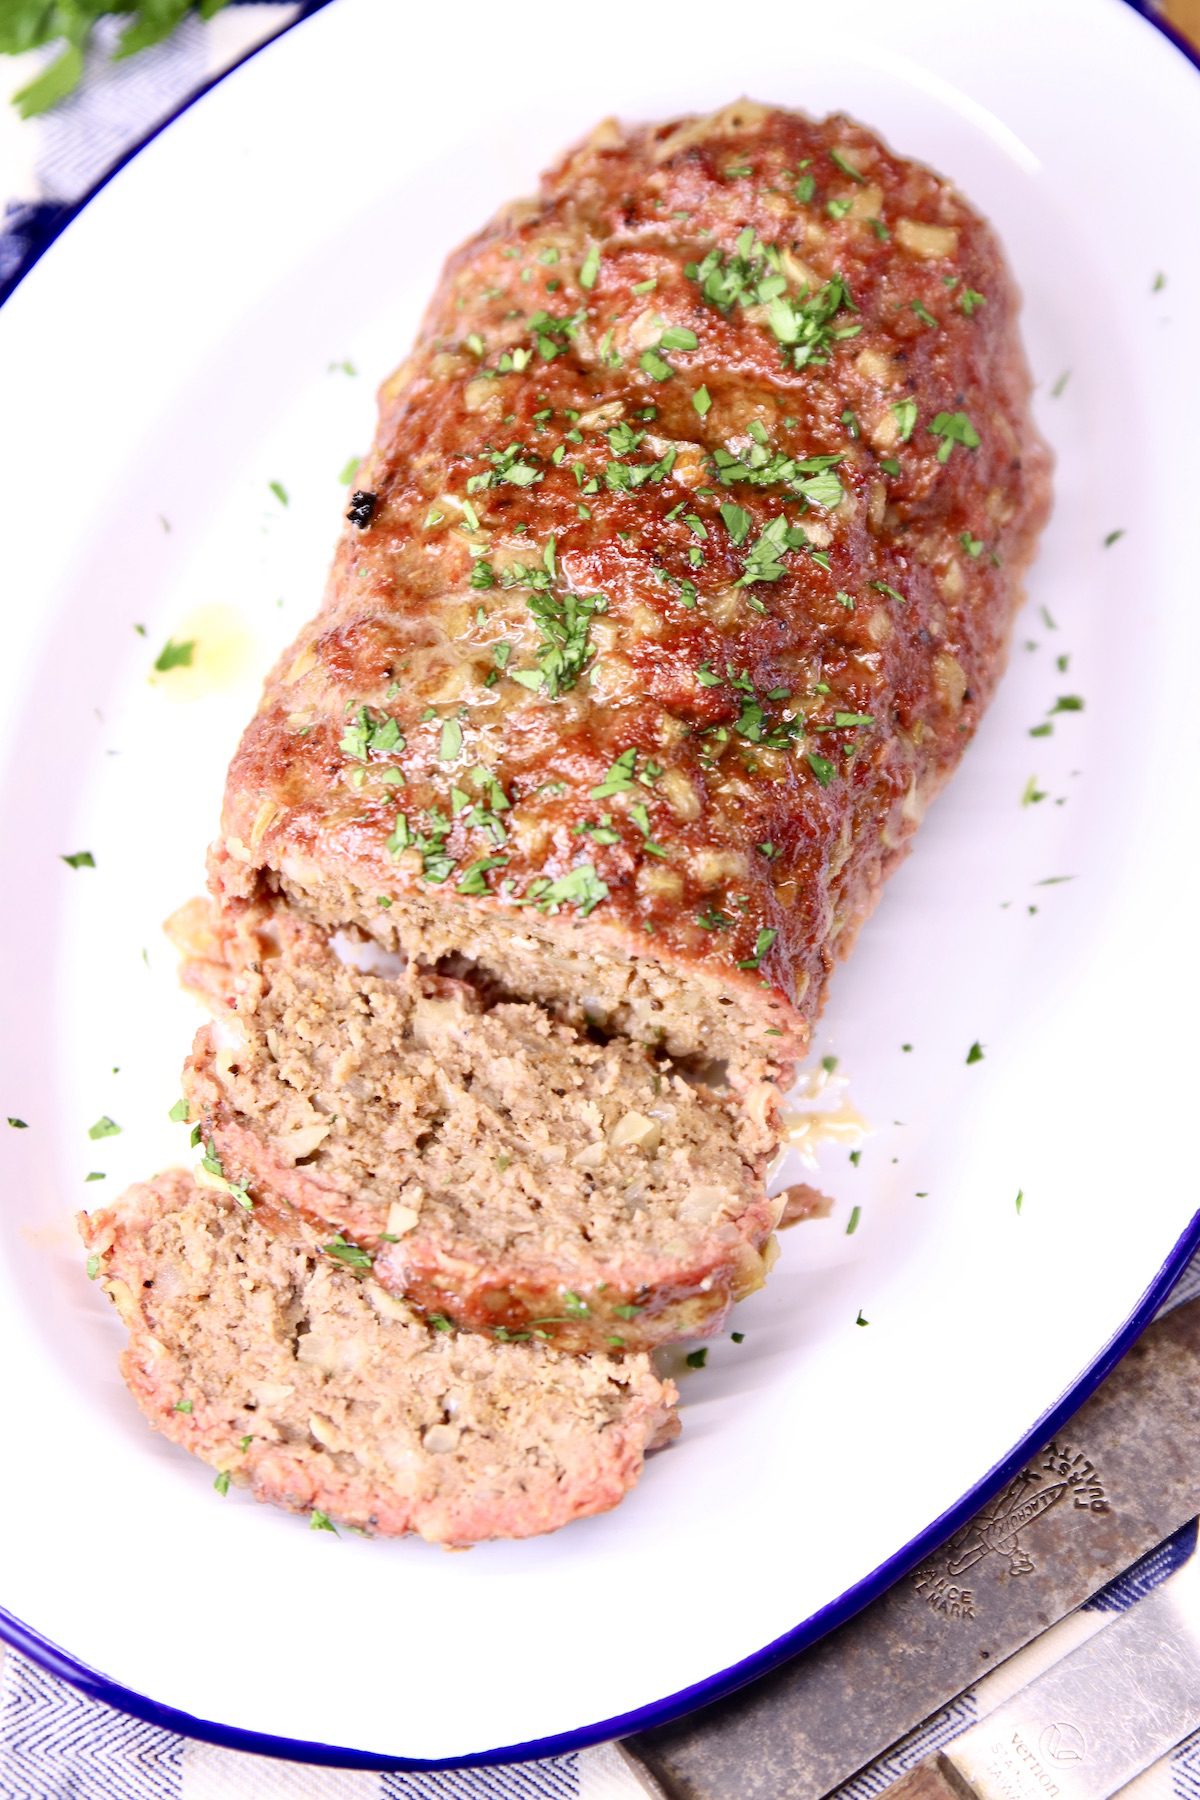 Grilled meatloaf - overhead view - partially sliced